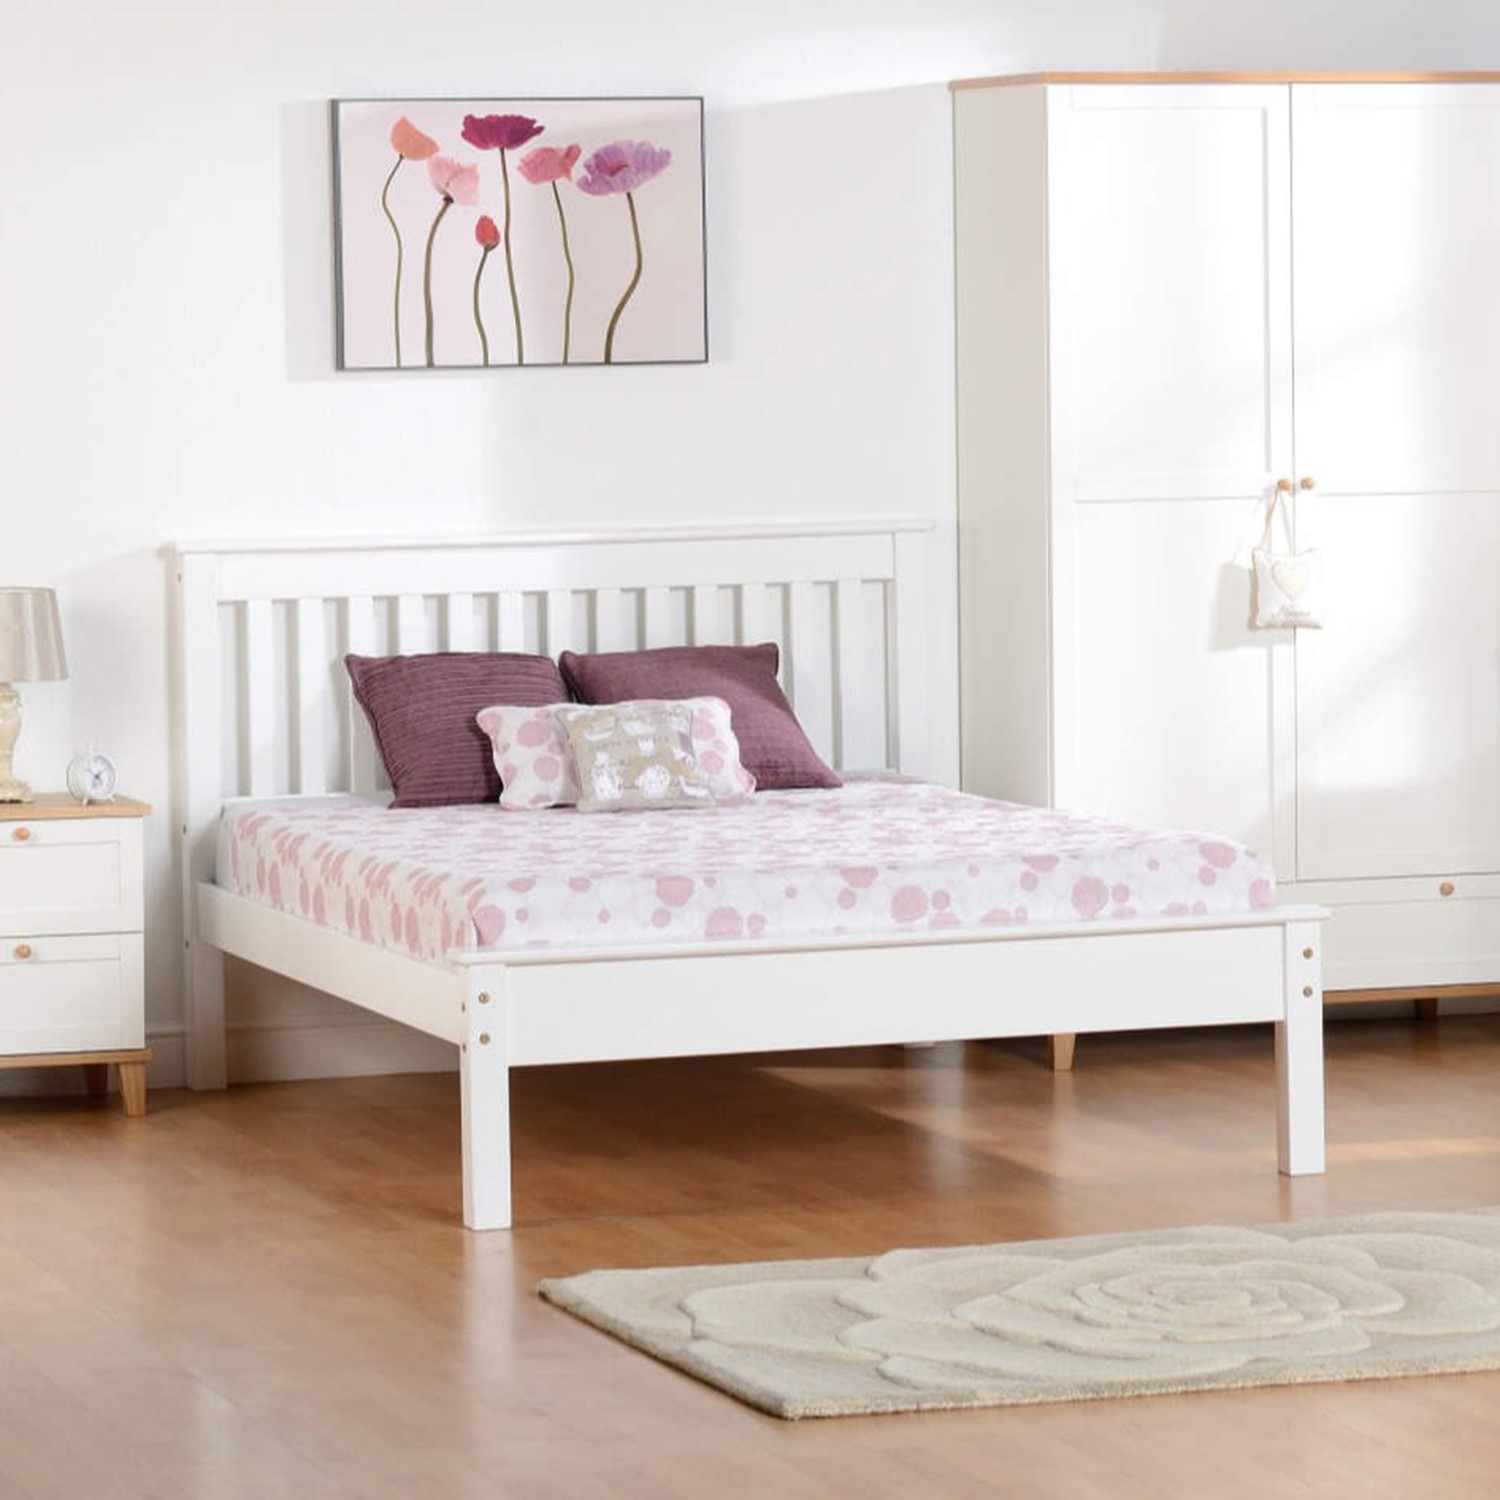 Seconique Monaco Double Bed Frame In, White Double Bed Frame